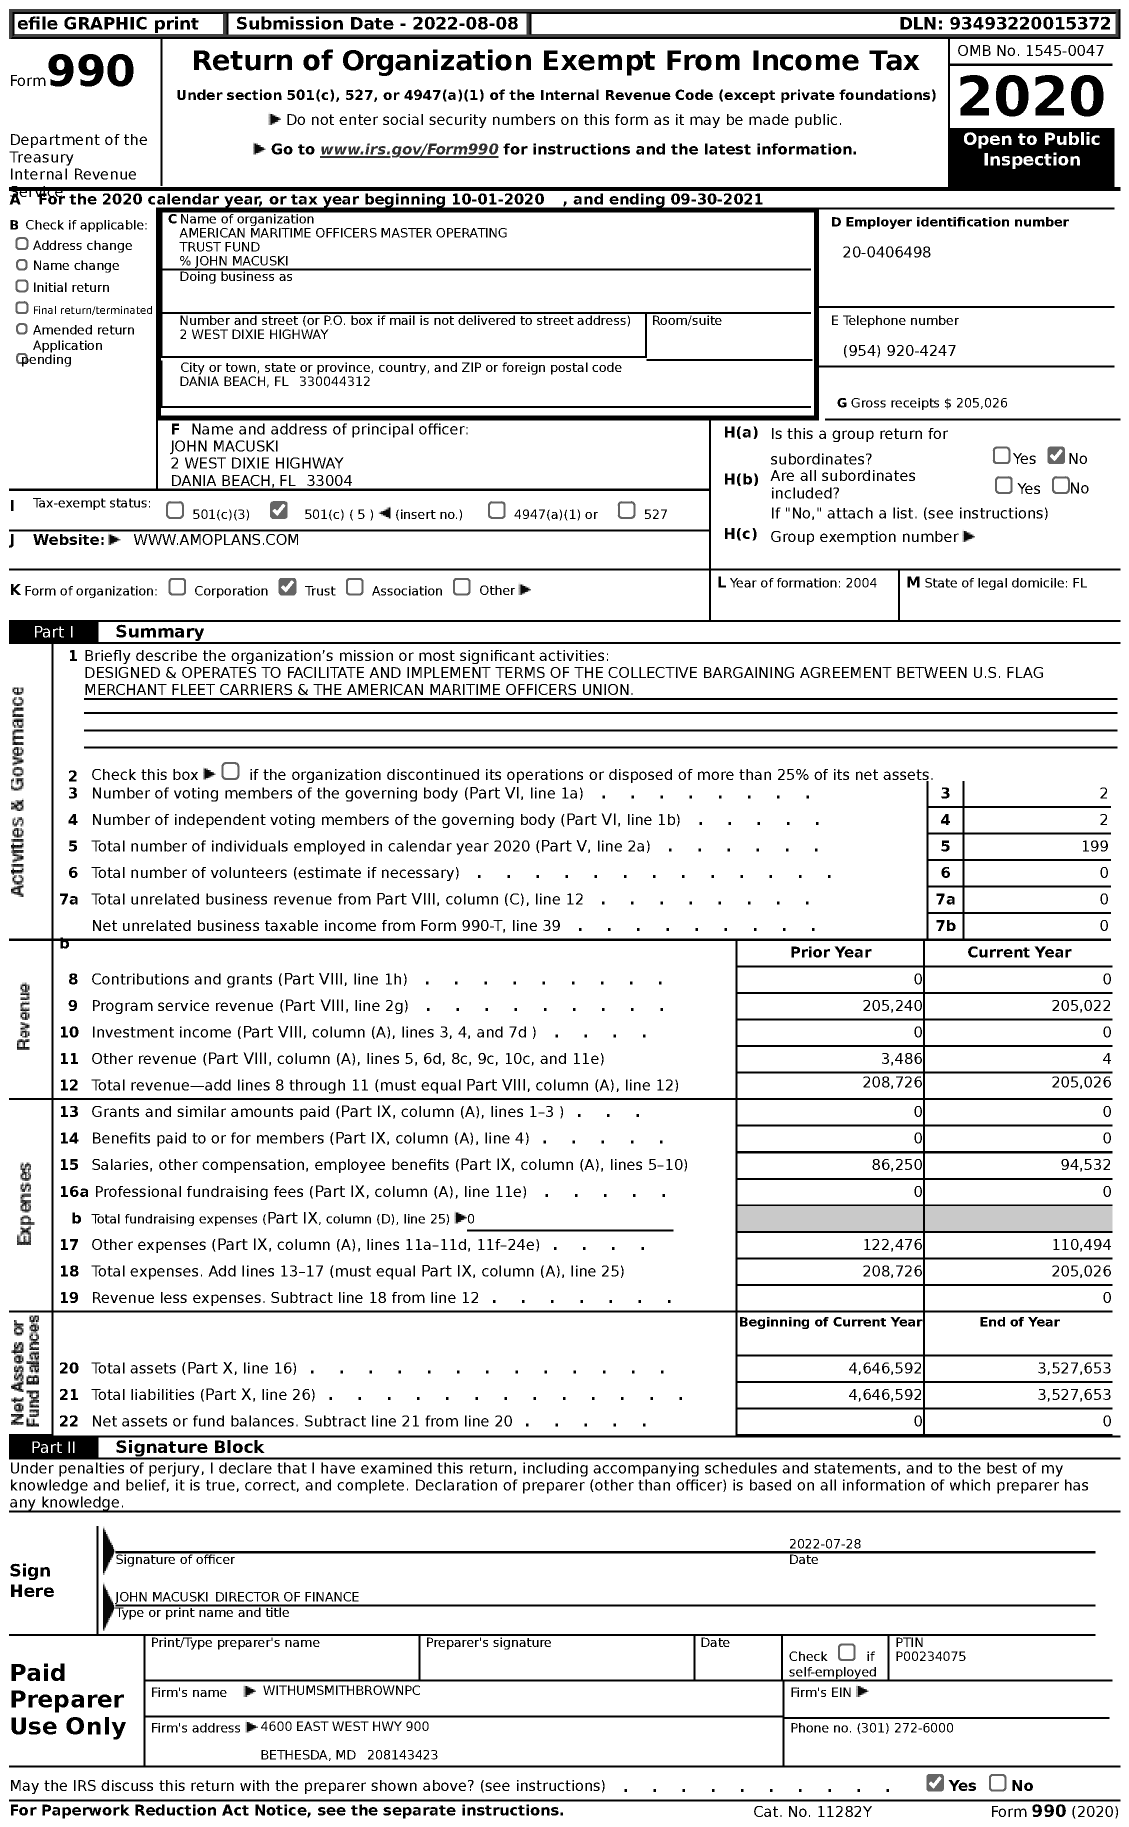 Image of first page of 2020 Form 990 for American Maritime Officers Master Operating Trust Fund